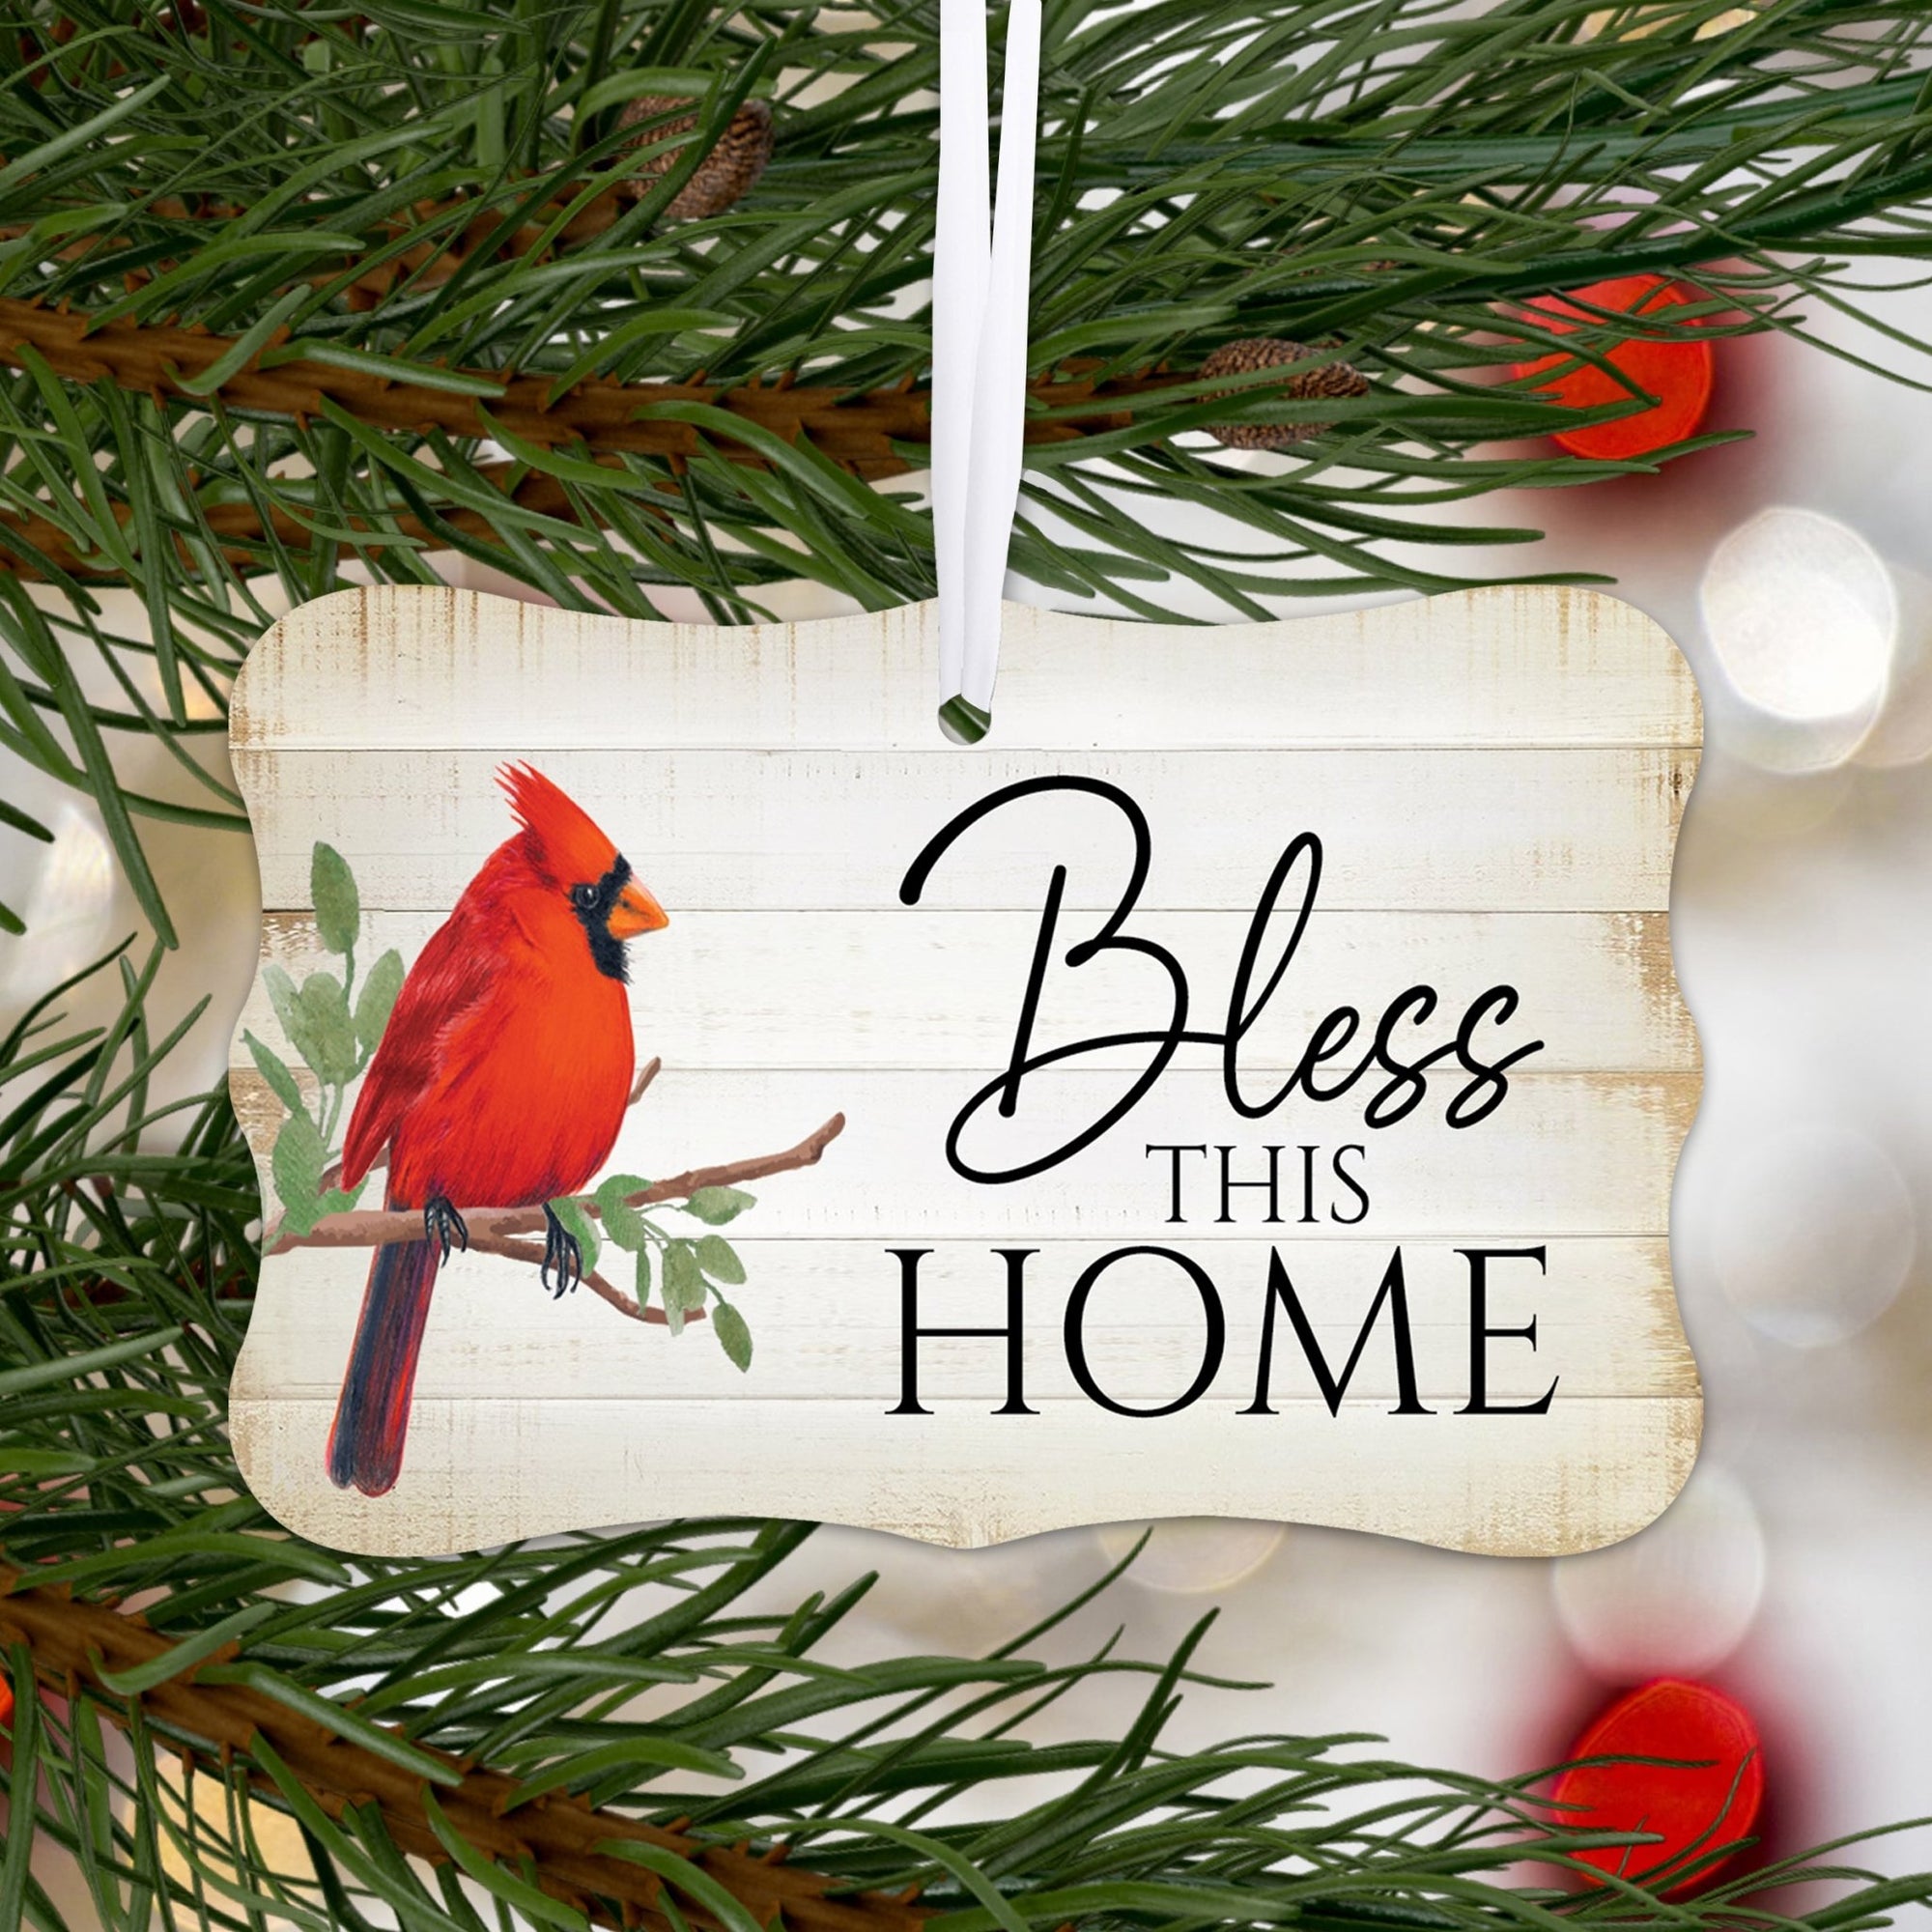 Rustic Scalloped Cardinal Wooden Ornament With Everyday Verses Gift Ideas - Bless This Home - LifeSong Milestones